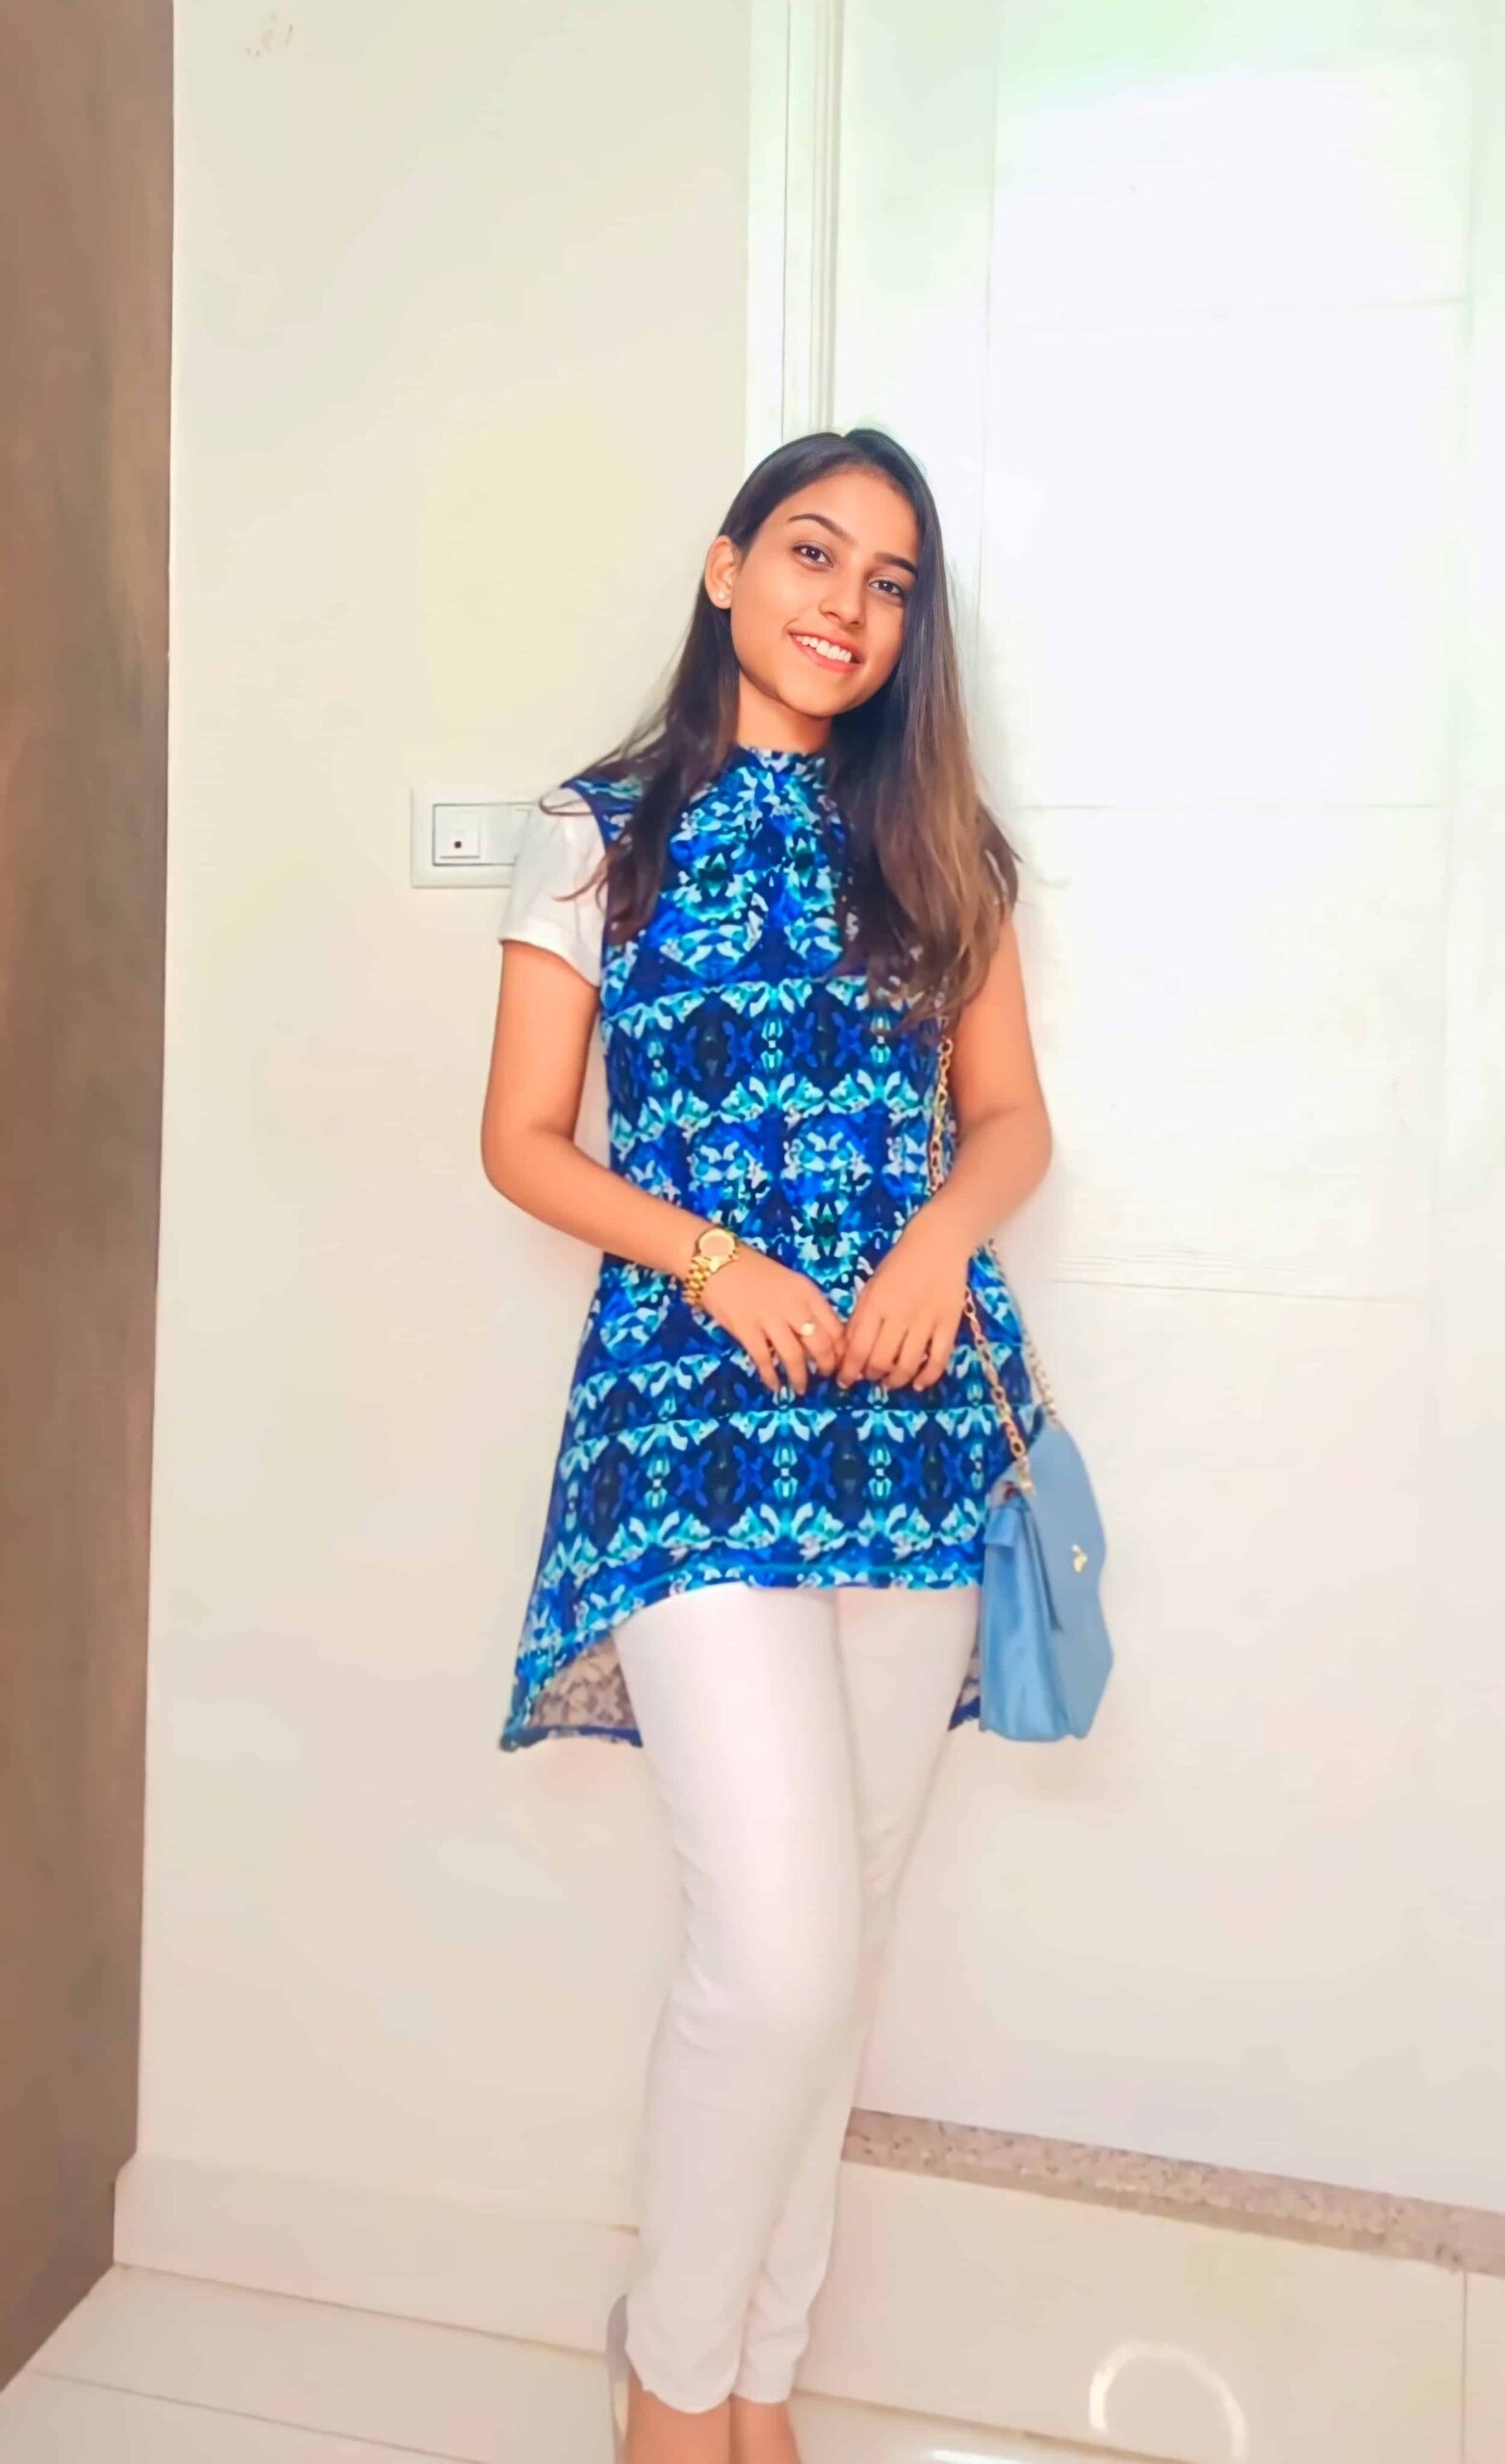 Modest outfits for Indian college, how to dress modest